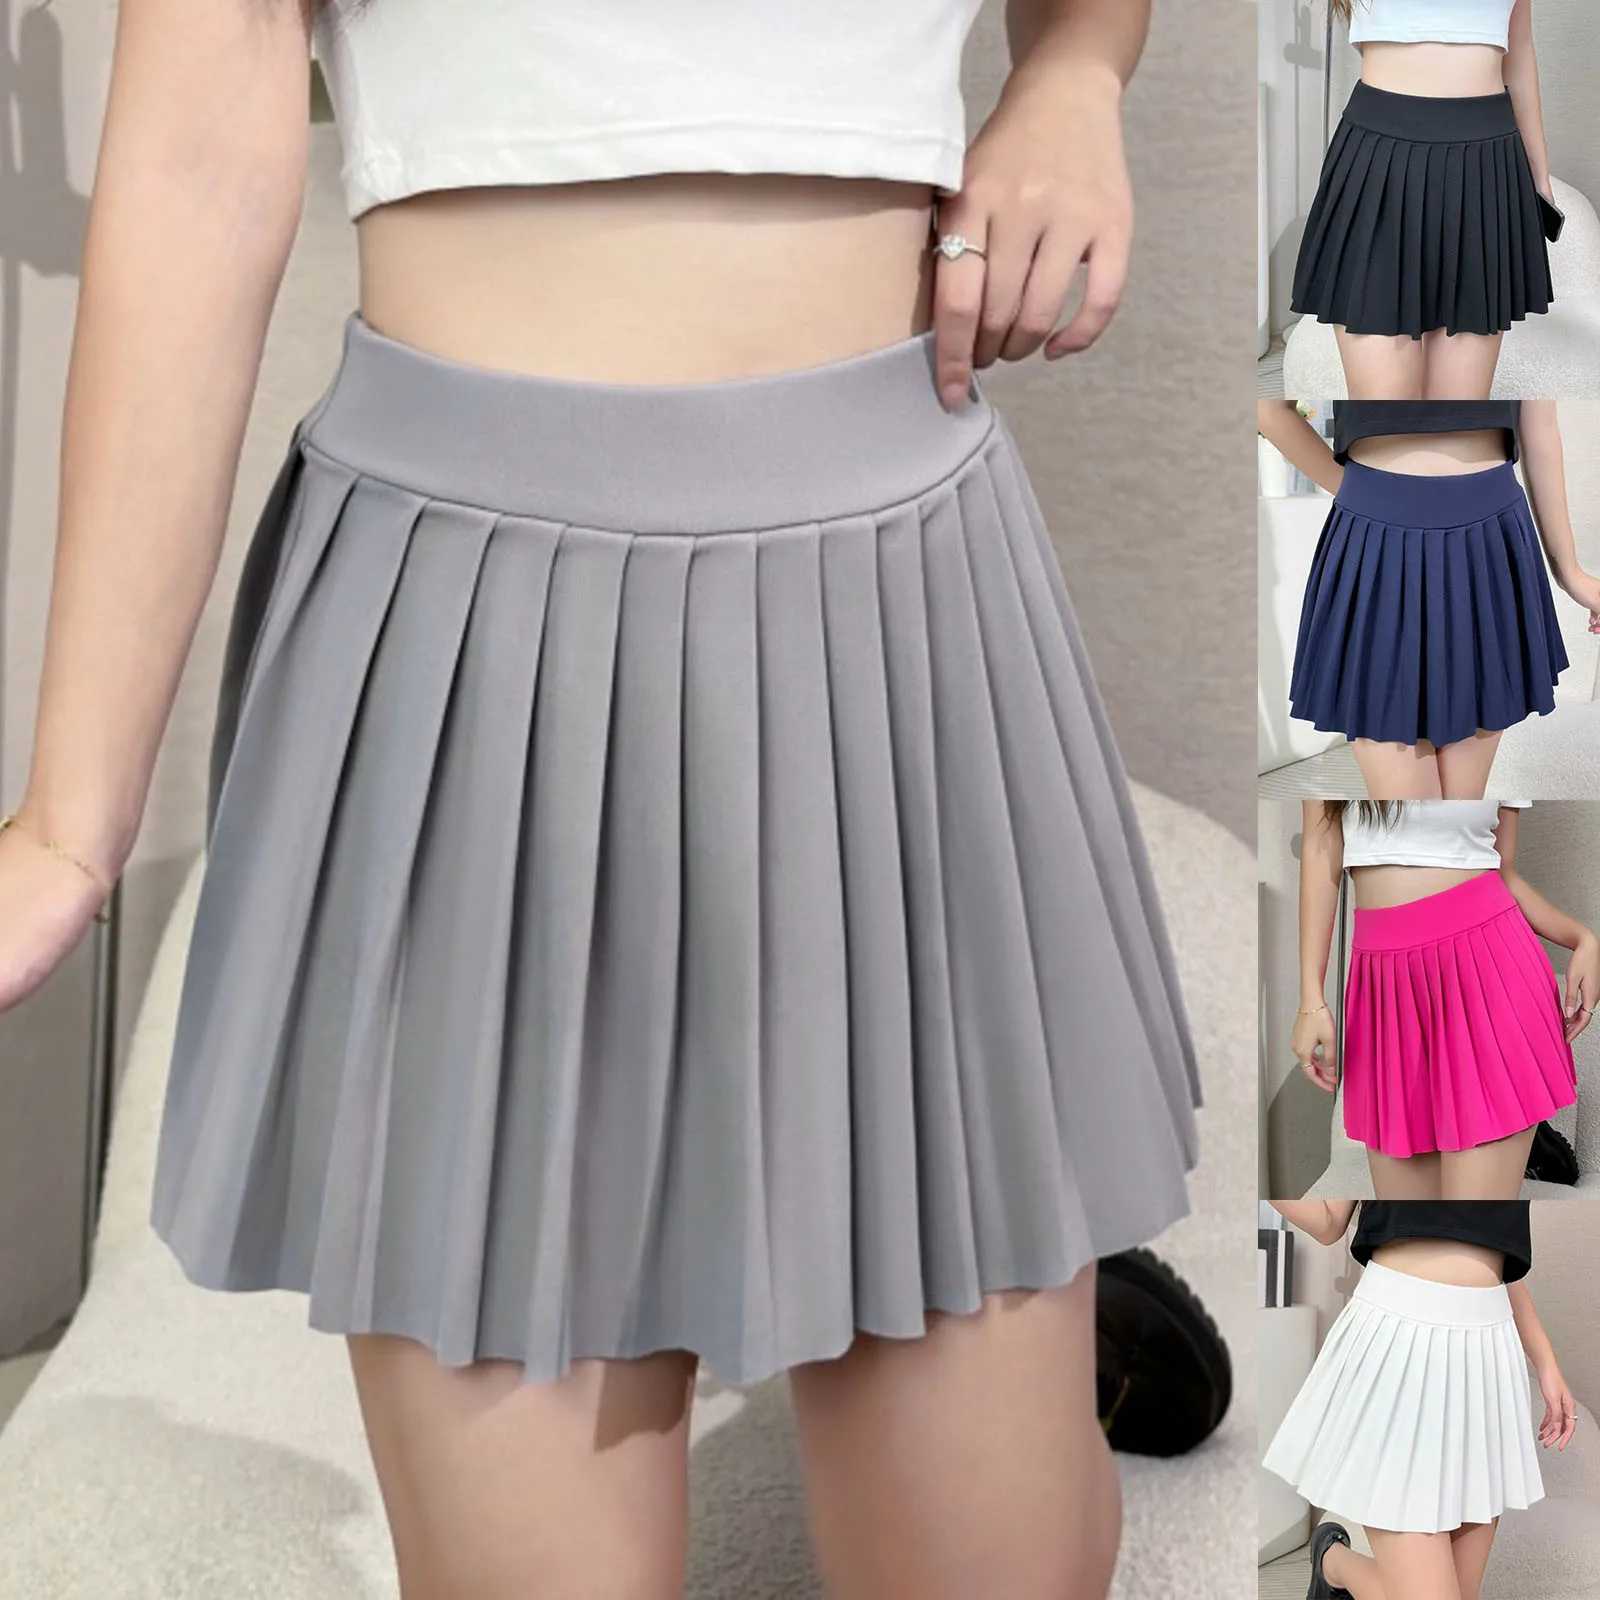 

Women Skirt Fashionable New Pattern Minimalist Solid Color Elastic Waistband Comfortable And Versatile Slim Fit Pleated Skirt